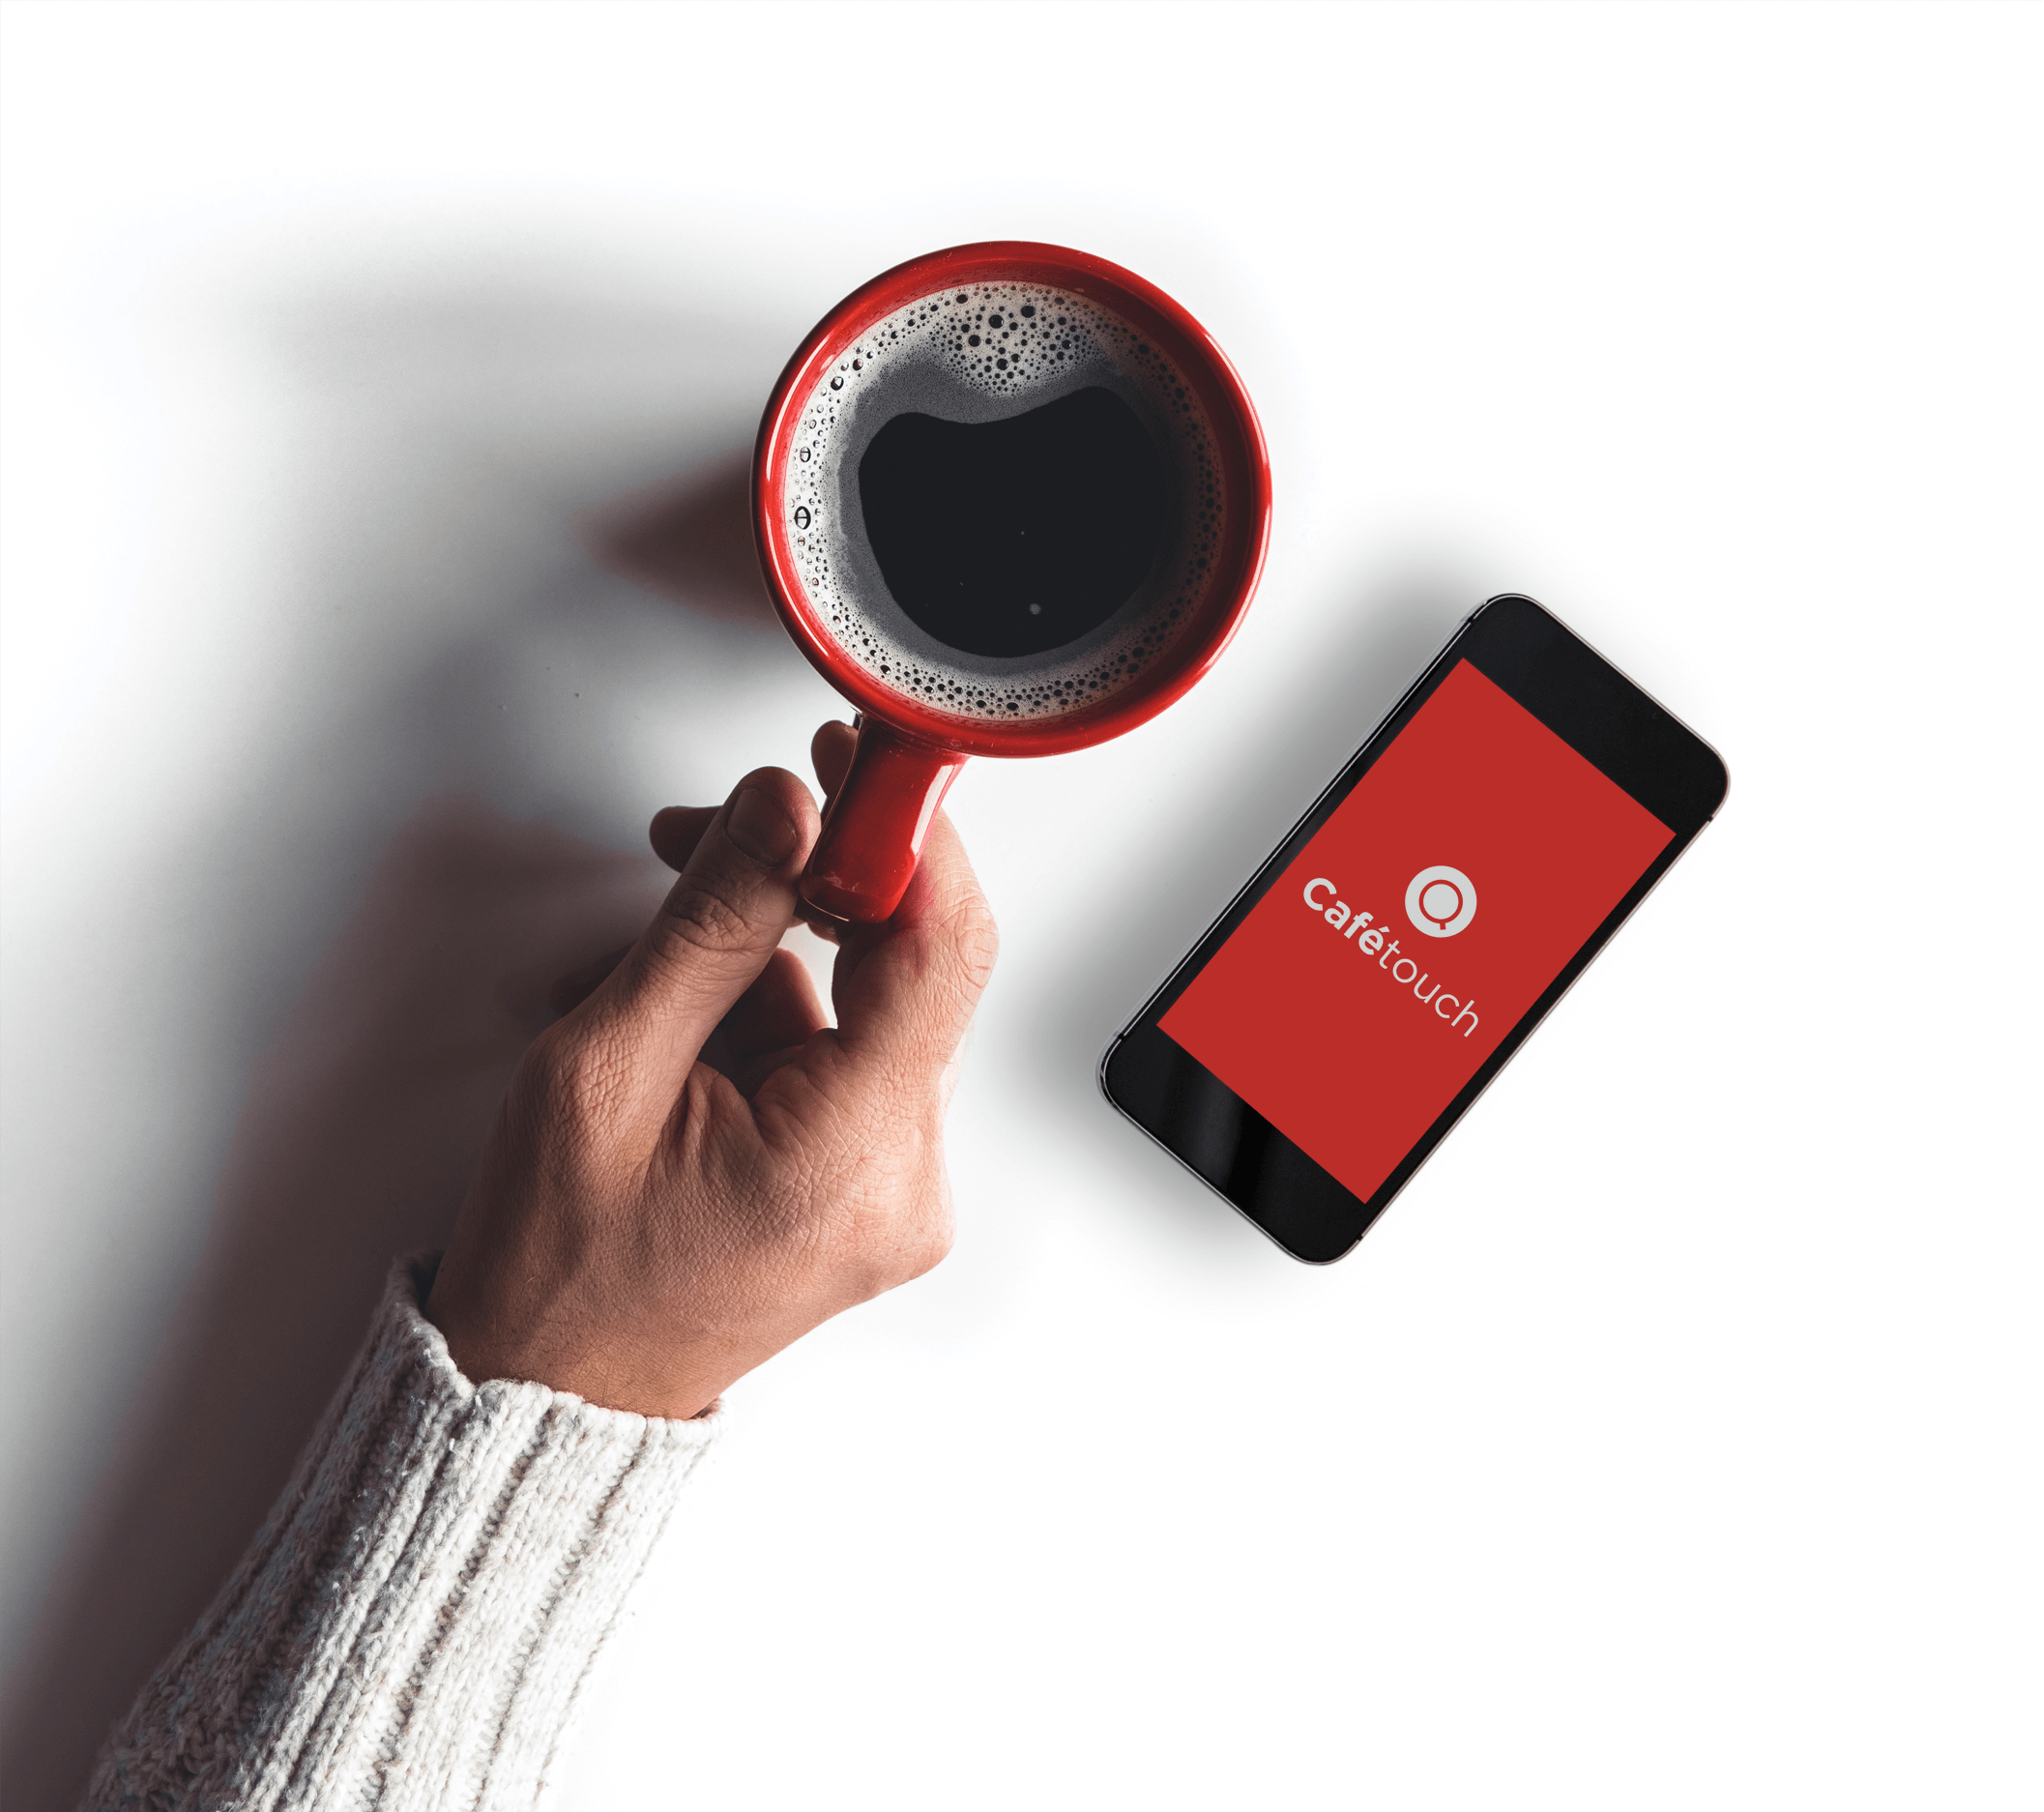 Hand holding red mug of black coffee with mobile phone to the right showing the cafetouch app